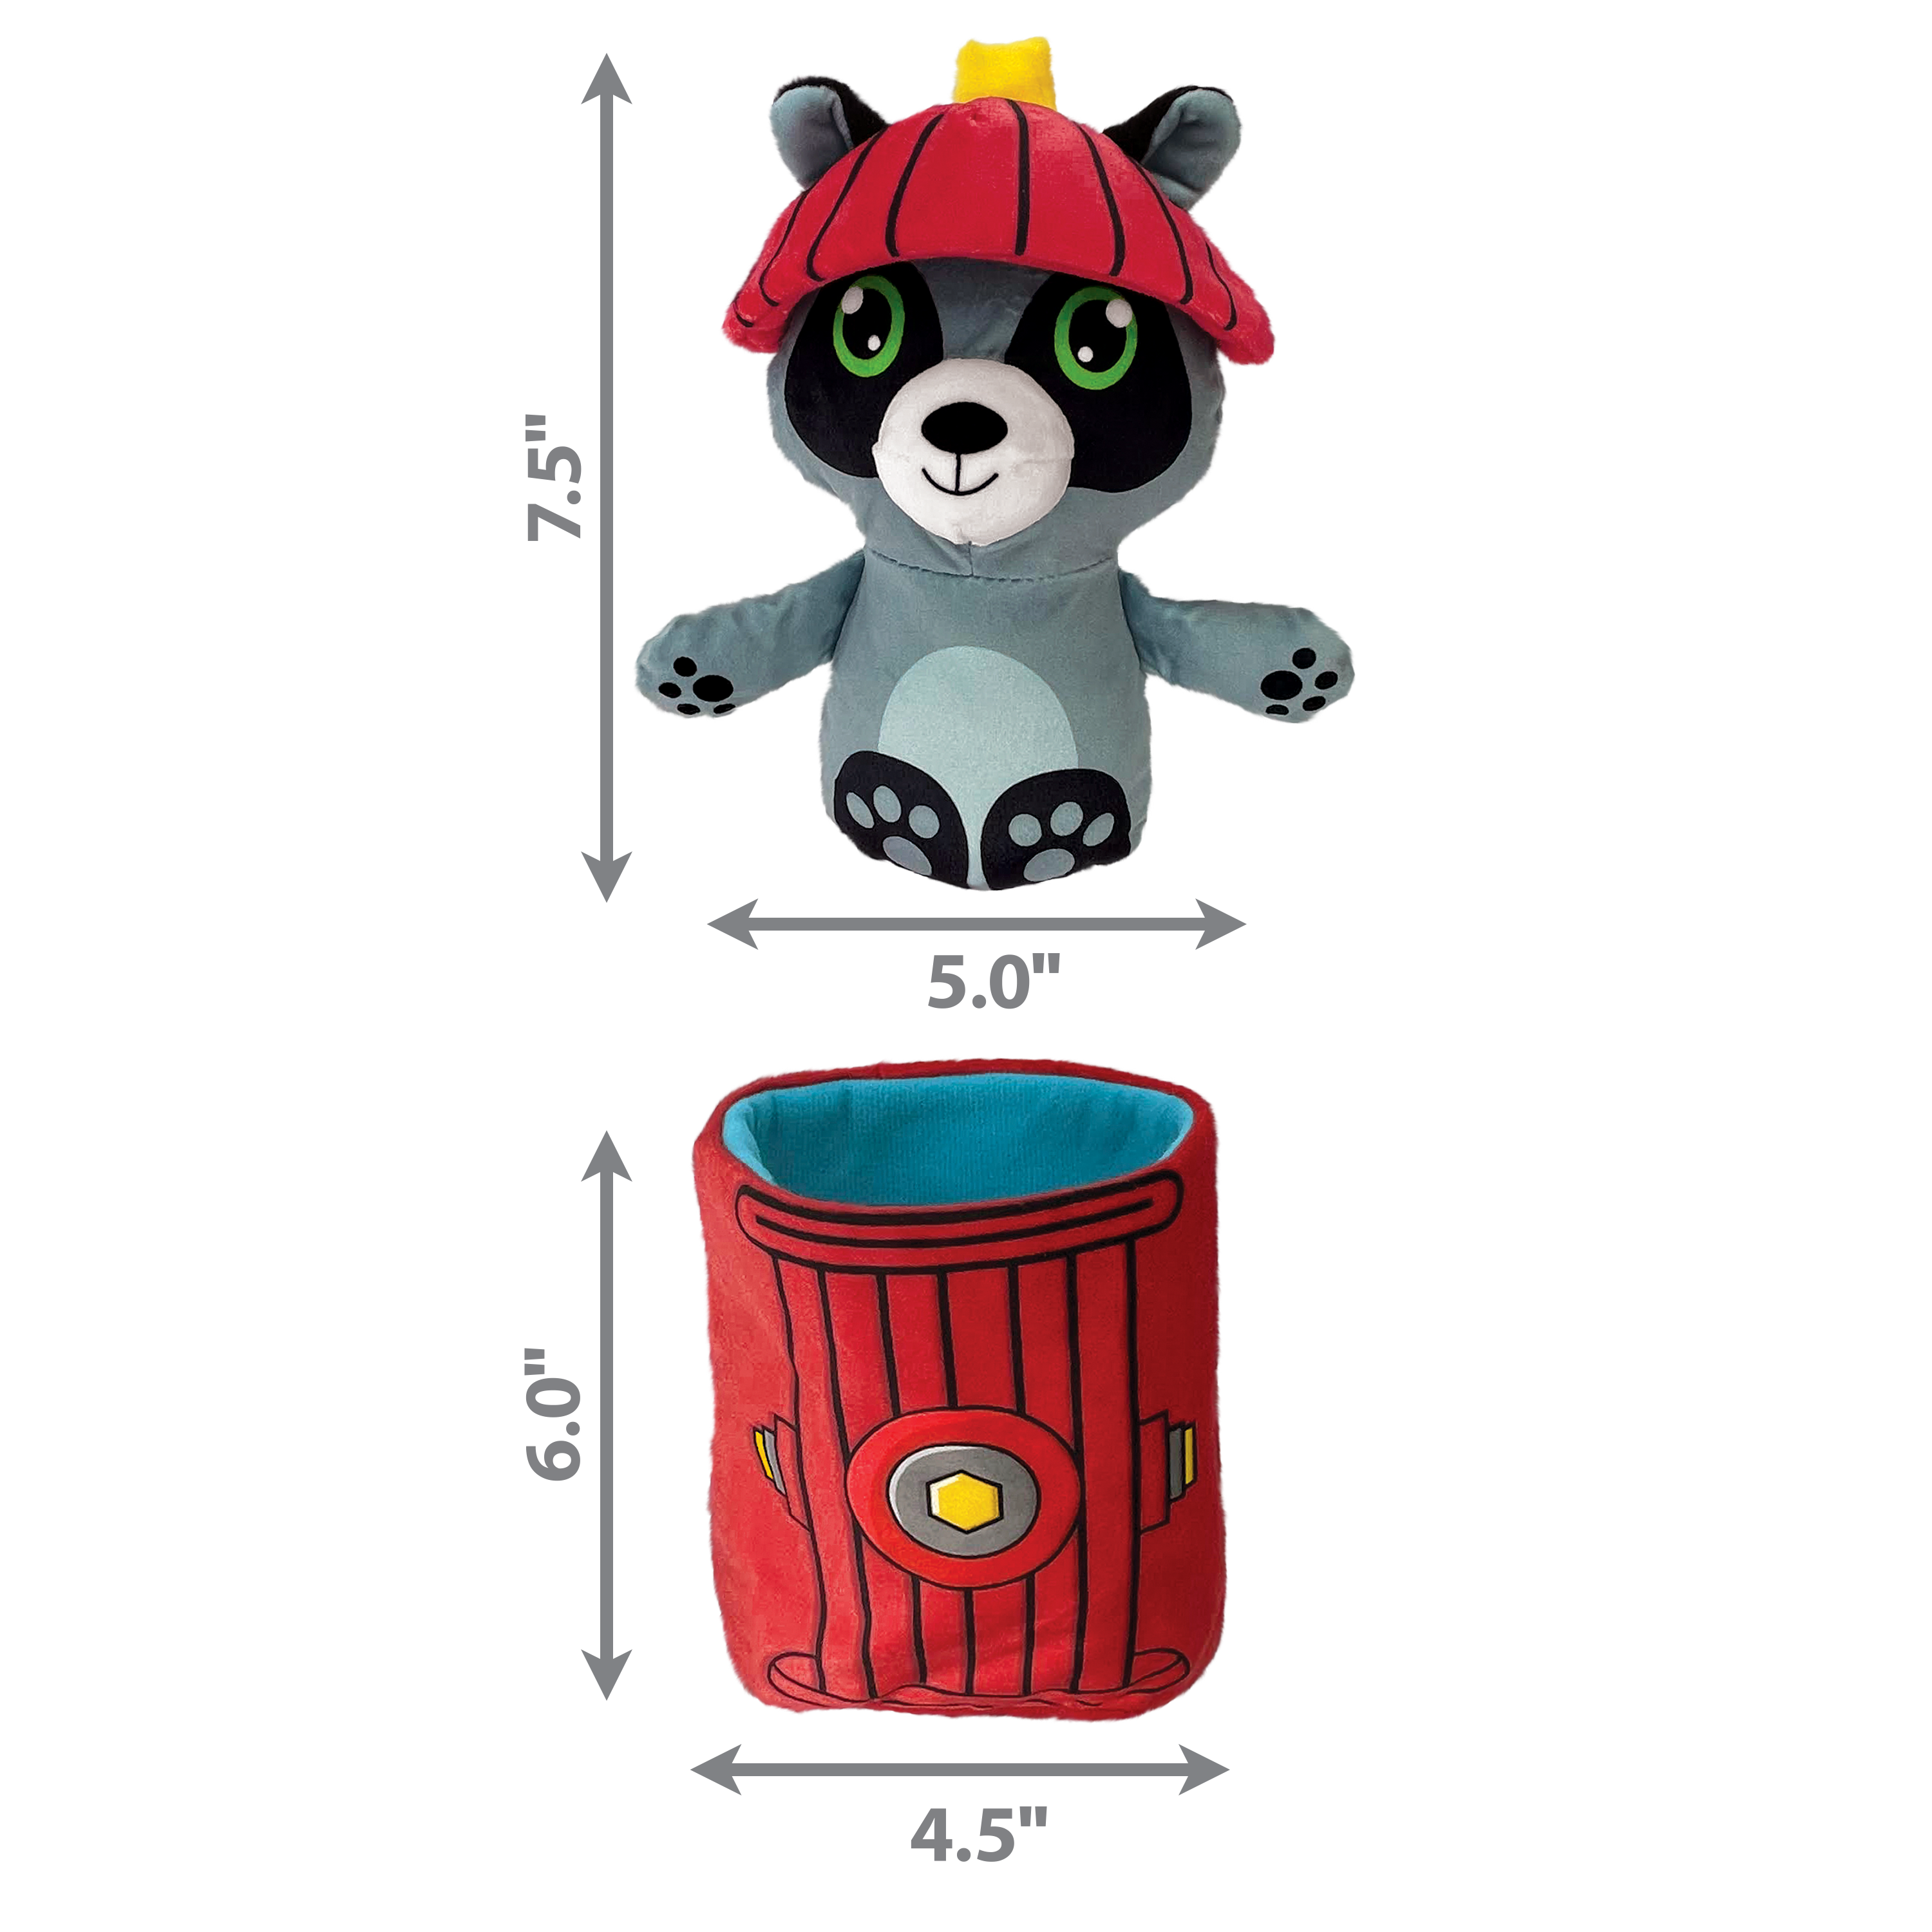 Puzzlements Surprise Fire Hydrant dimoffpack product image